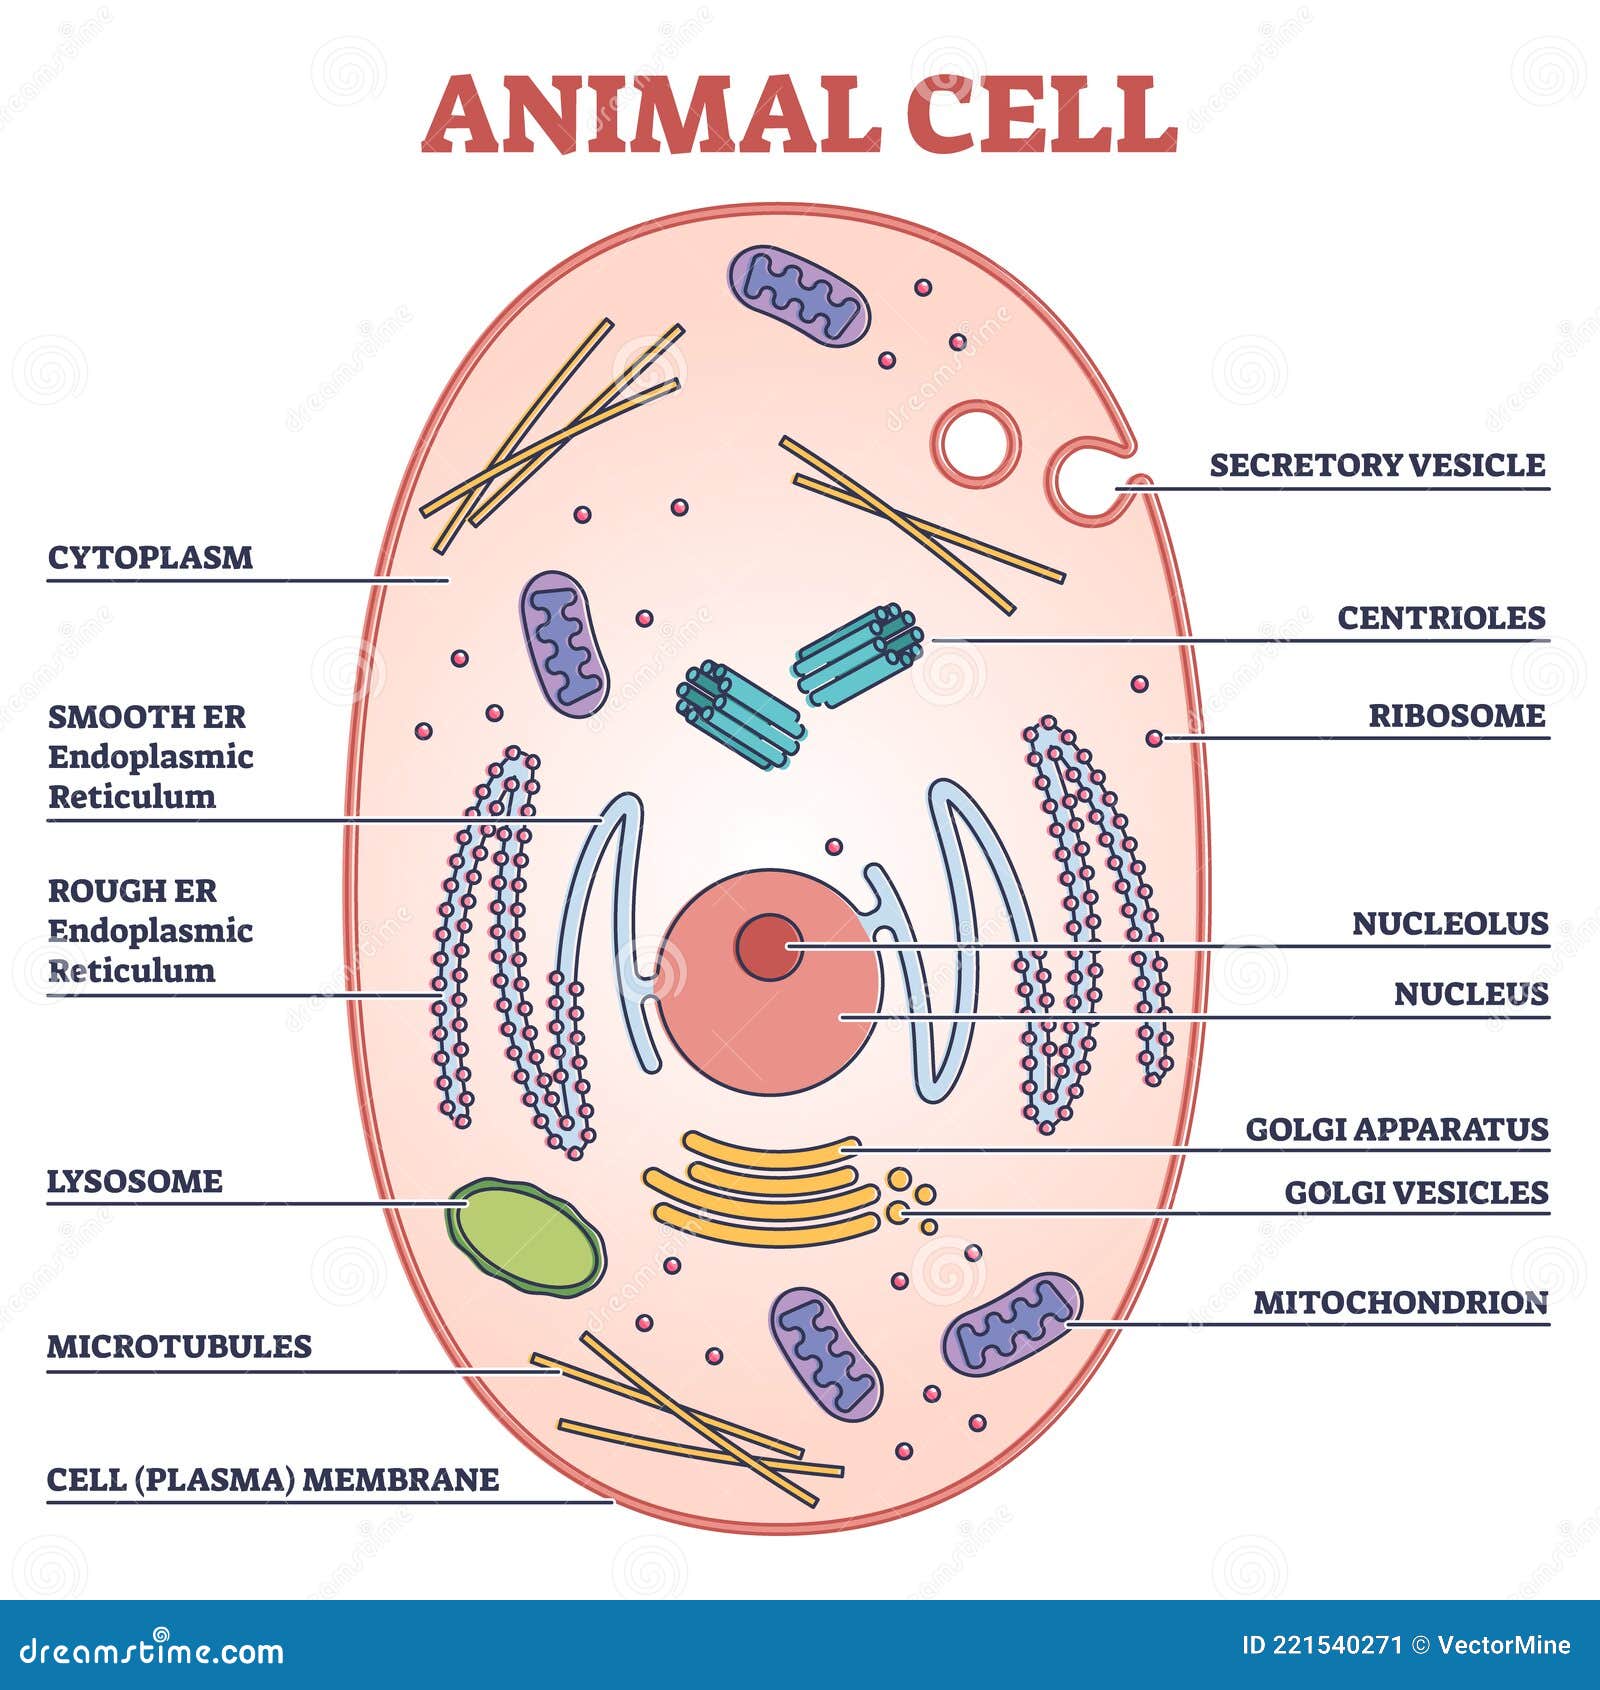 Animal Cell with Labeled Anatomic Structure Parts Diagram Outline Concept  Stock Vector - Illustration of genetic, medical: 221540271